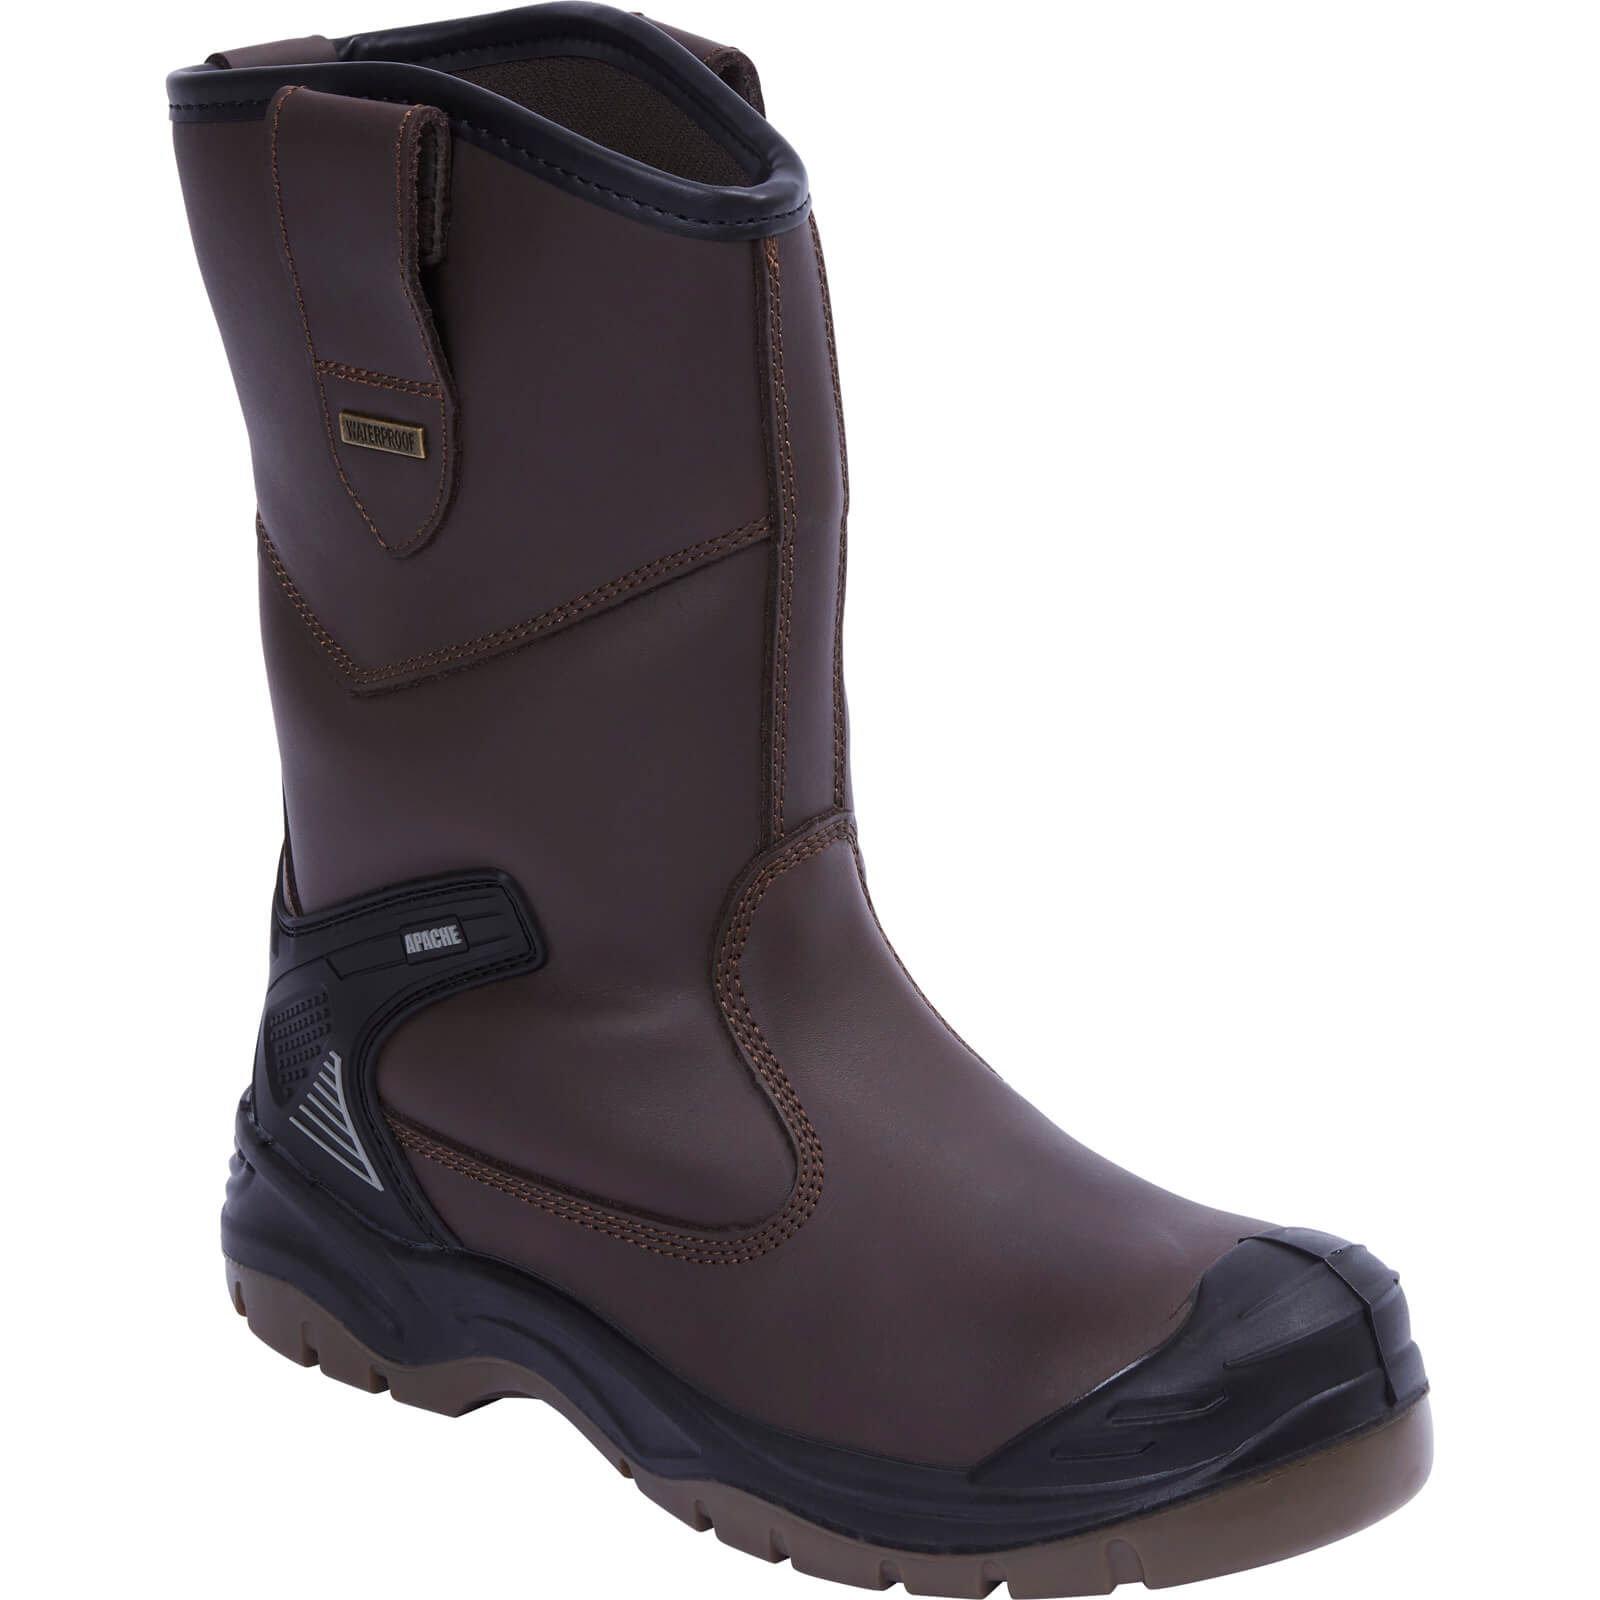 Image of Apache AP305 Waterproof Safety Rigger Boots Brown Size 6